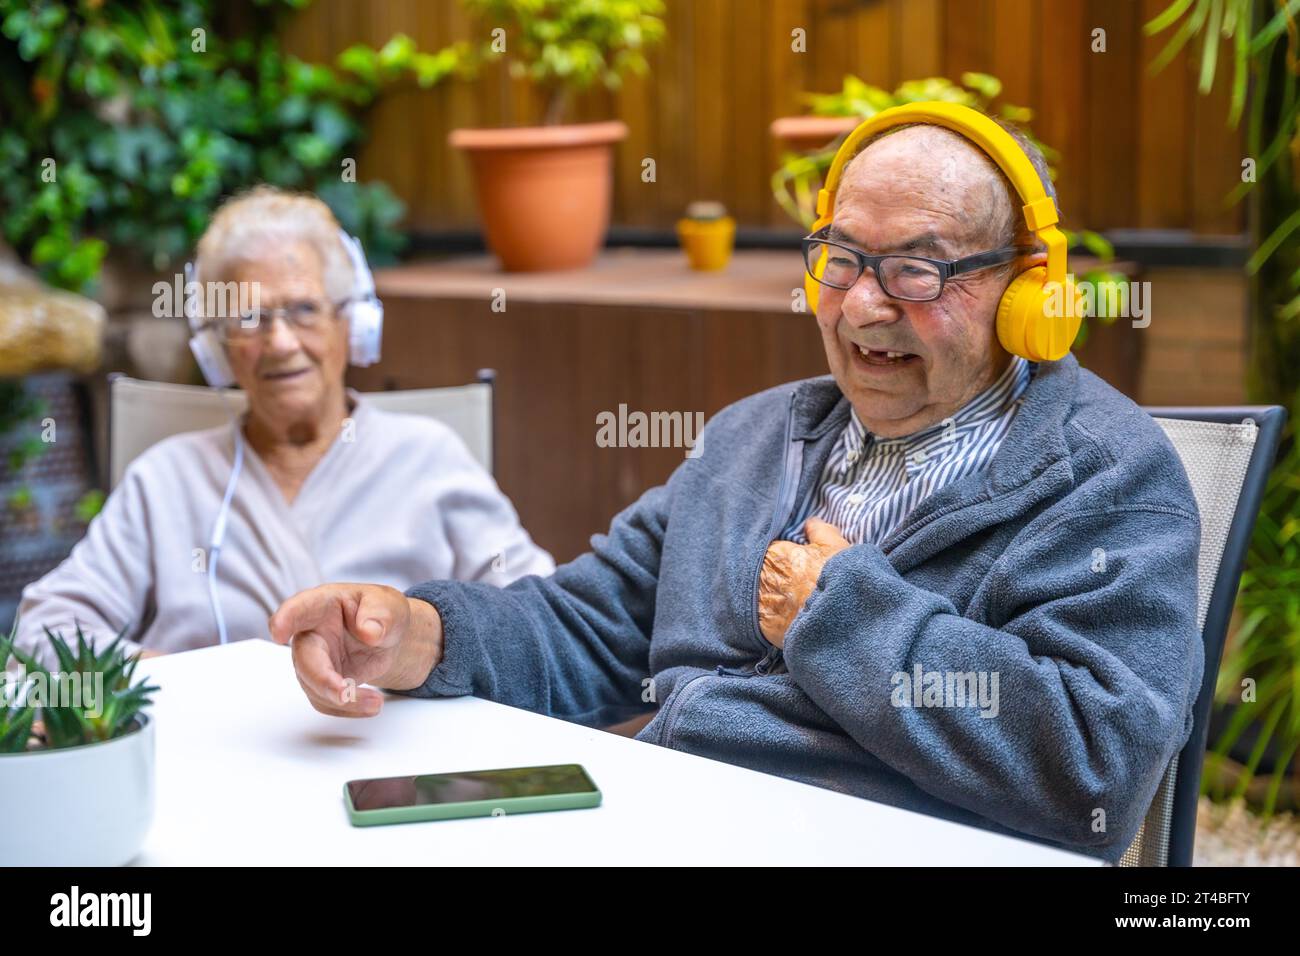 Happy old man listening to music with headphones in a geriatric next to other elder people Stock Photo